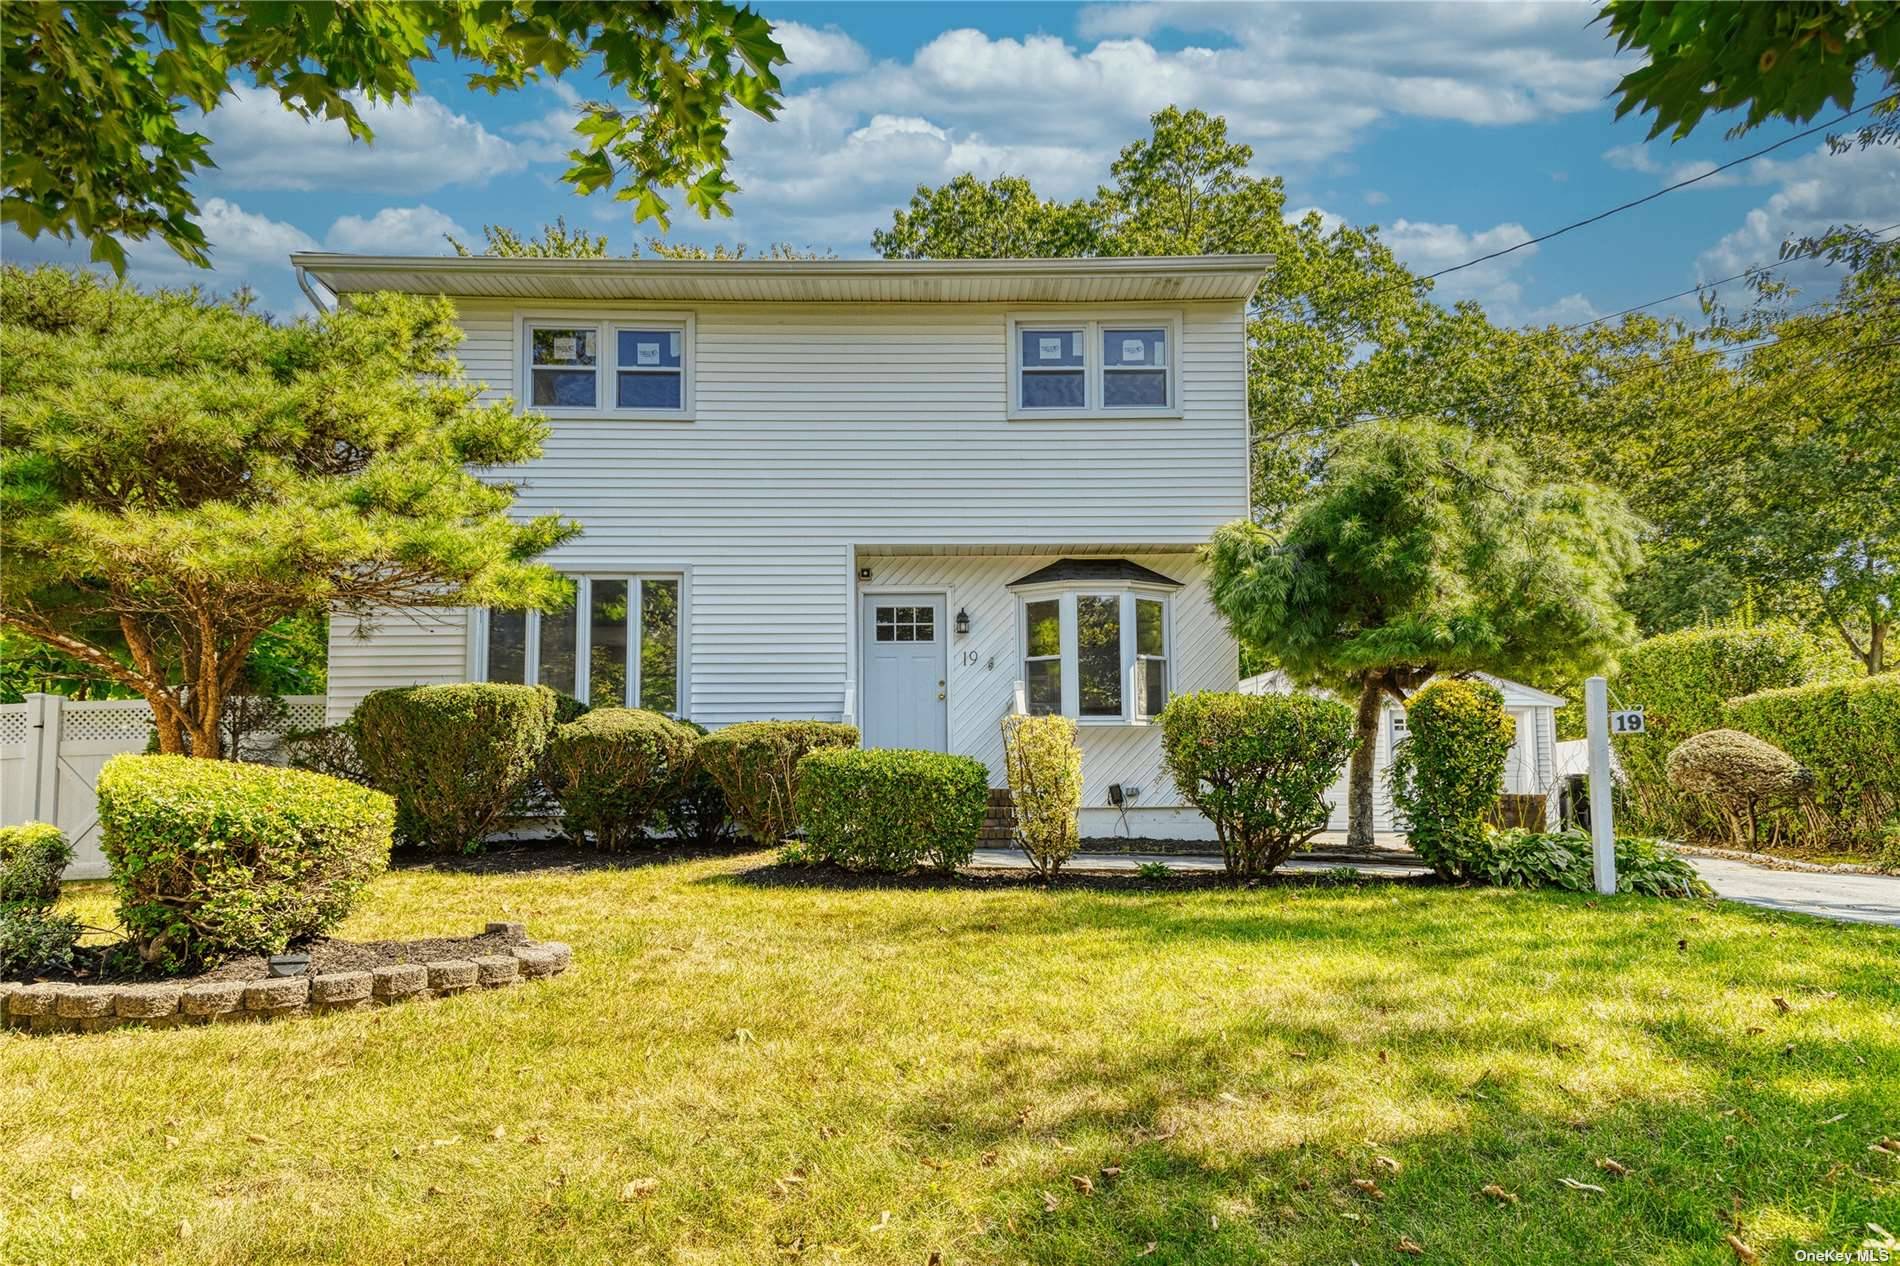 Newly renovated 4 Bedroom, 2 Full Bathroom Colonial in West Islip.